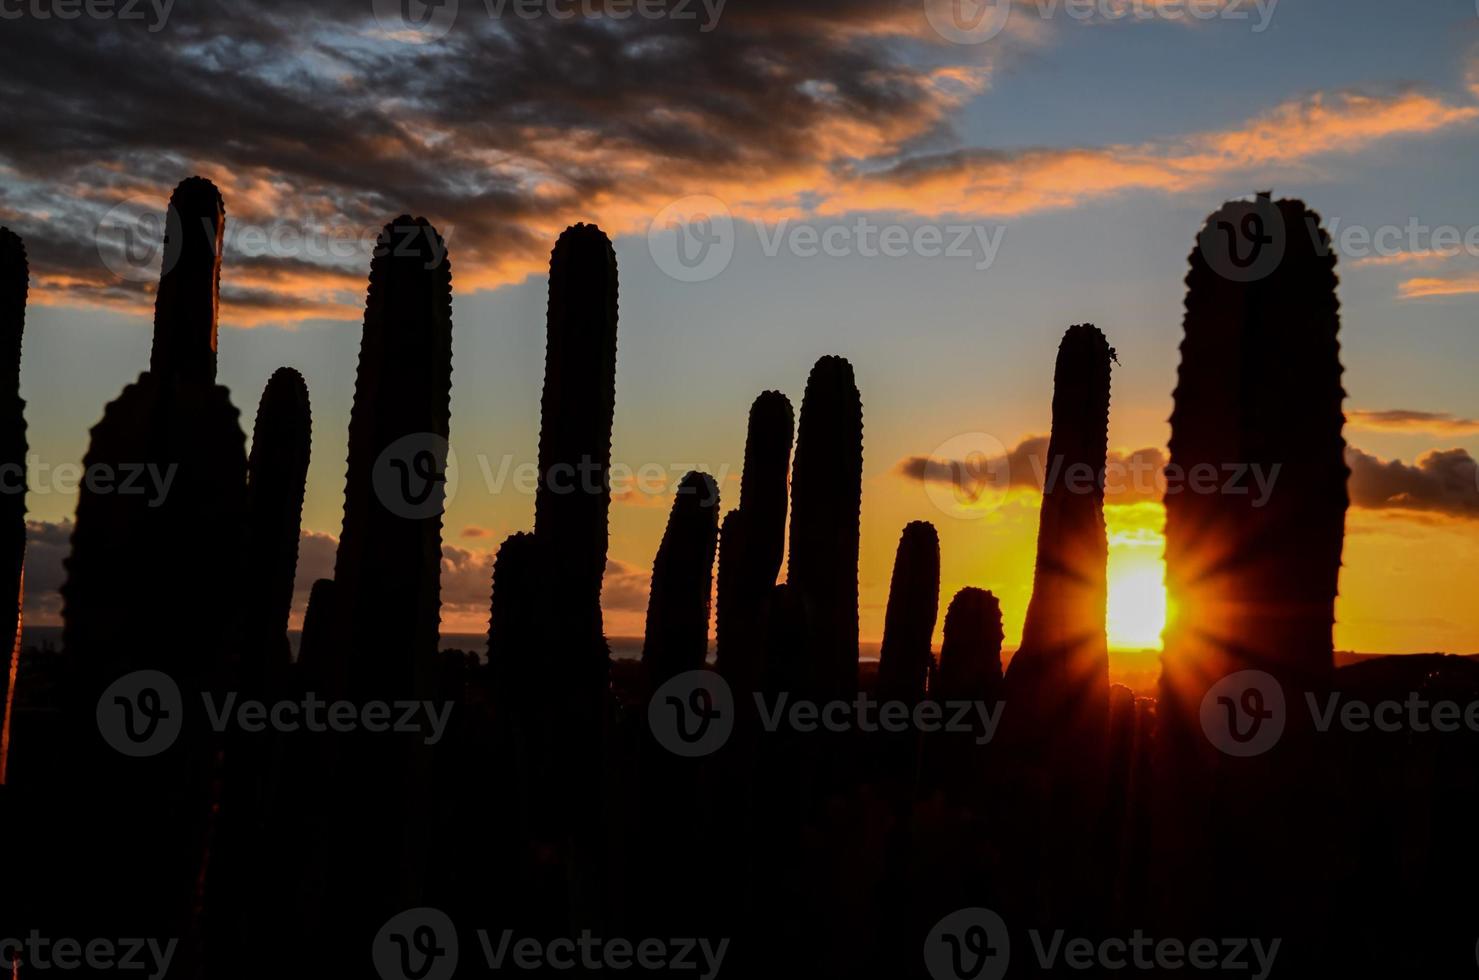 Cacti in the desert with sunset photo